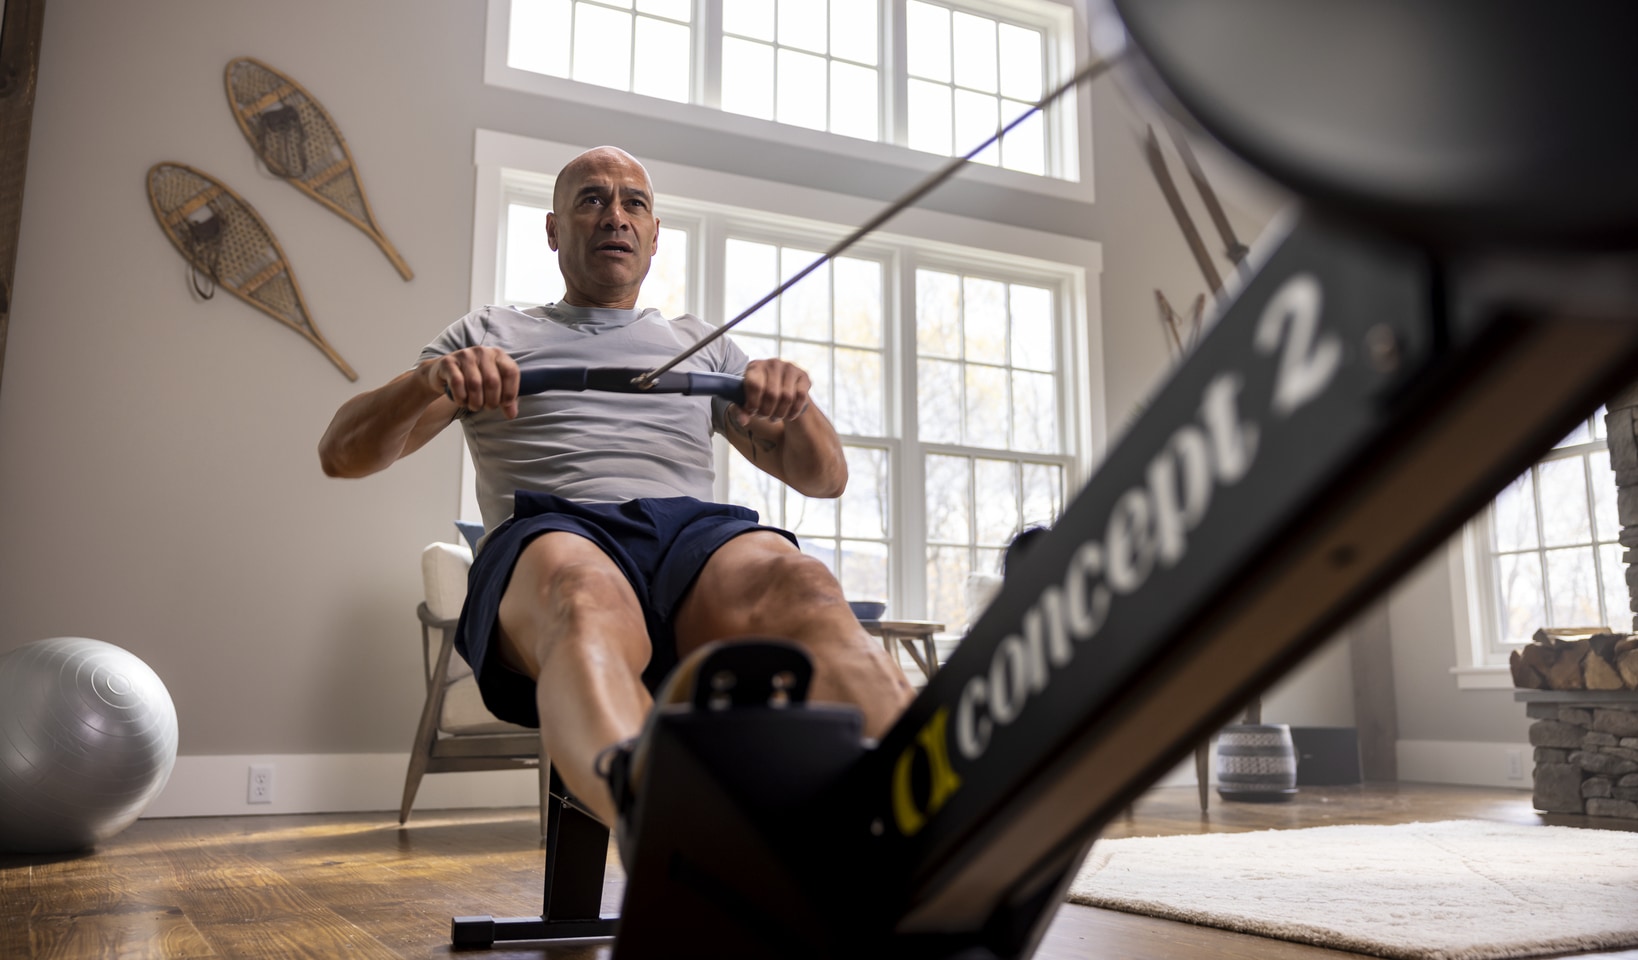 Compare prices for Concept2 across all European  stores